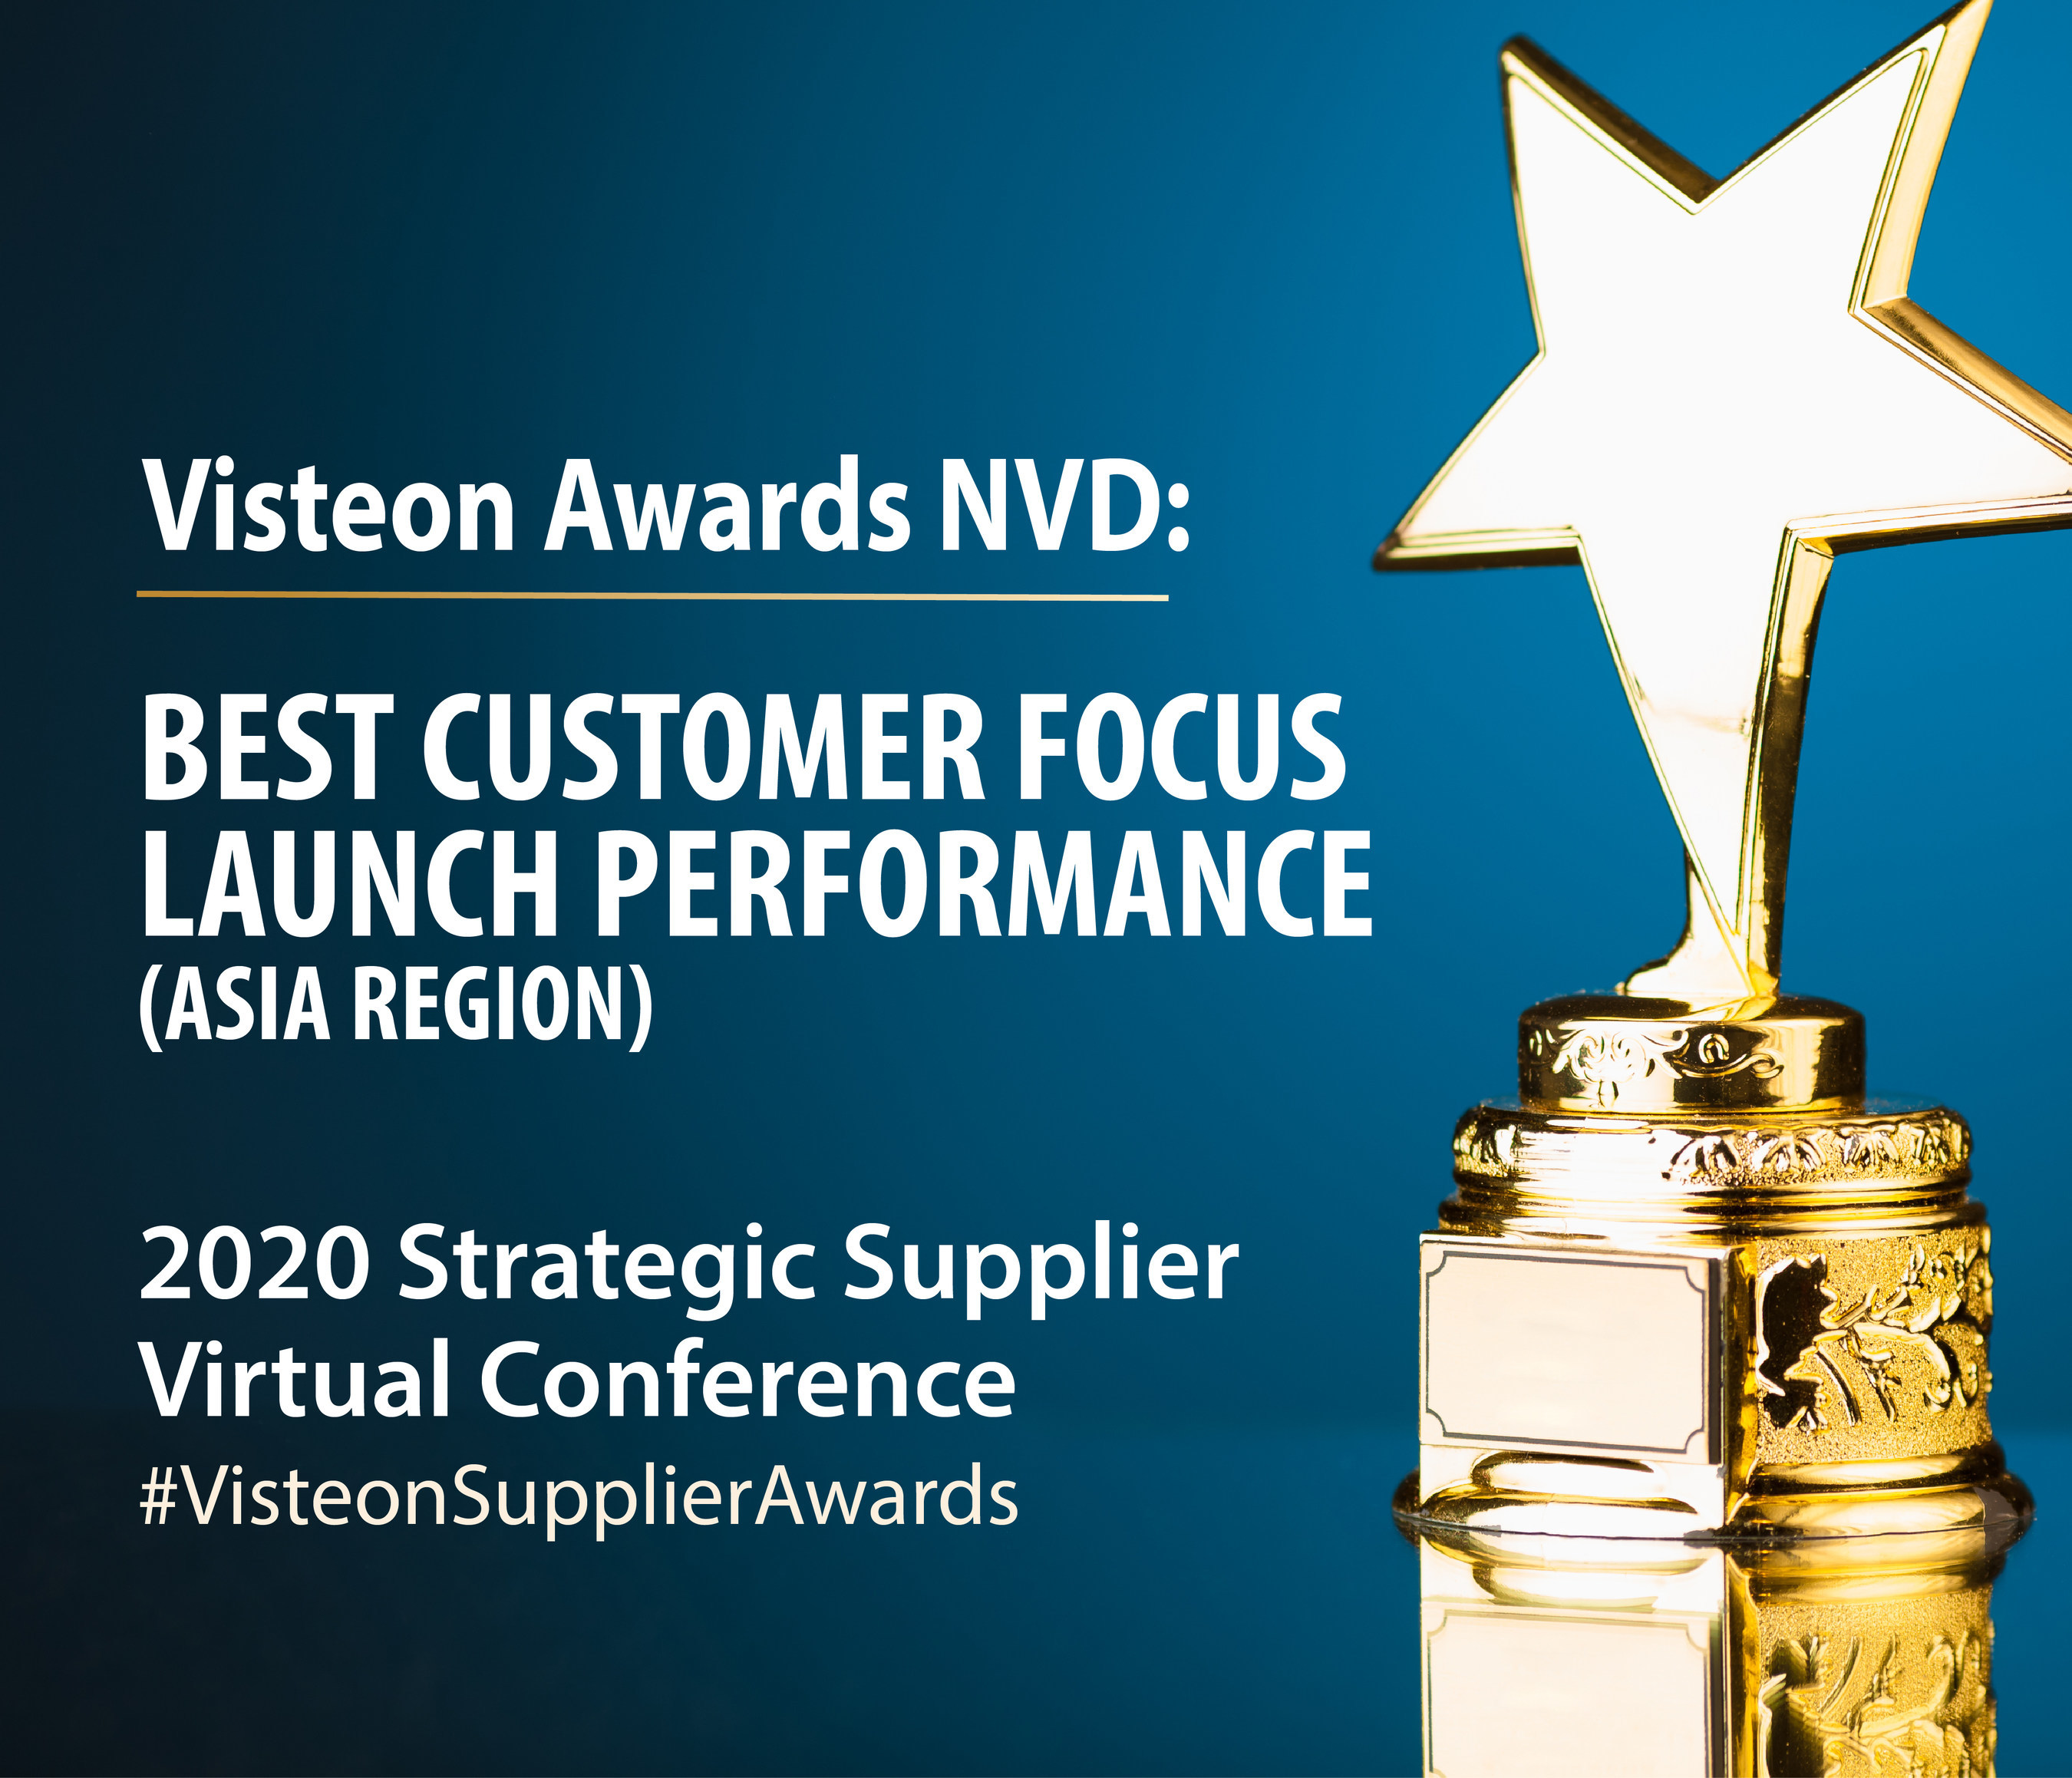 New Vision Display awarded Best Customer Focus Product Launch